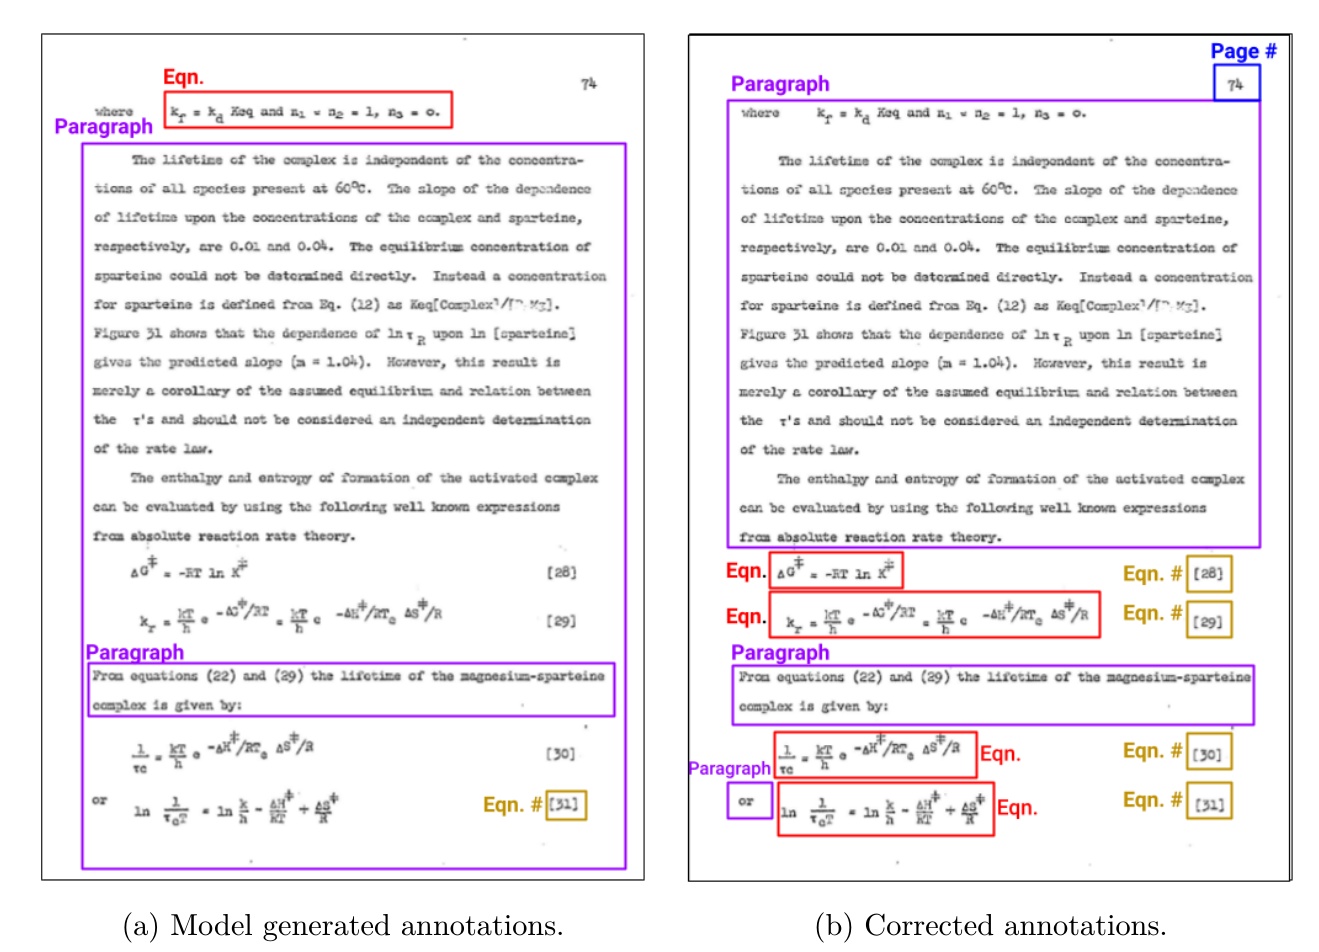 Figure 5.2: An illustration showing a page from a scanned document, the annotations gen-
erated by an object detection model trained on a small dataset, and the final annotations
after correction by a human annotator.